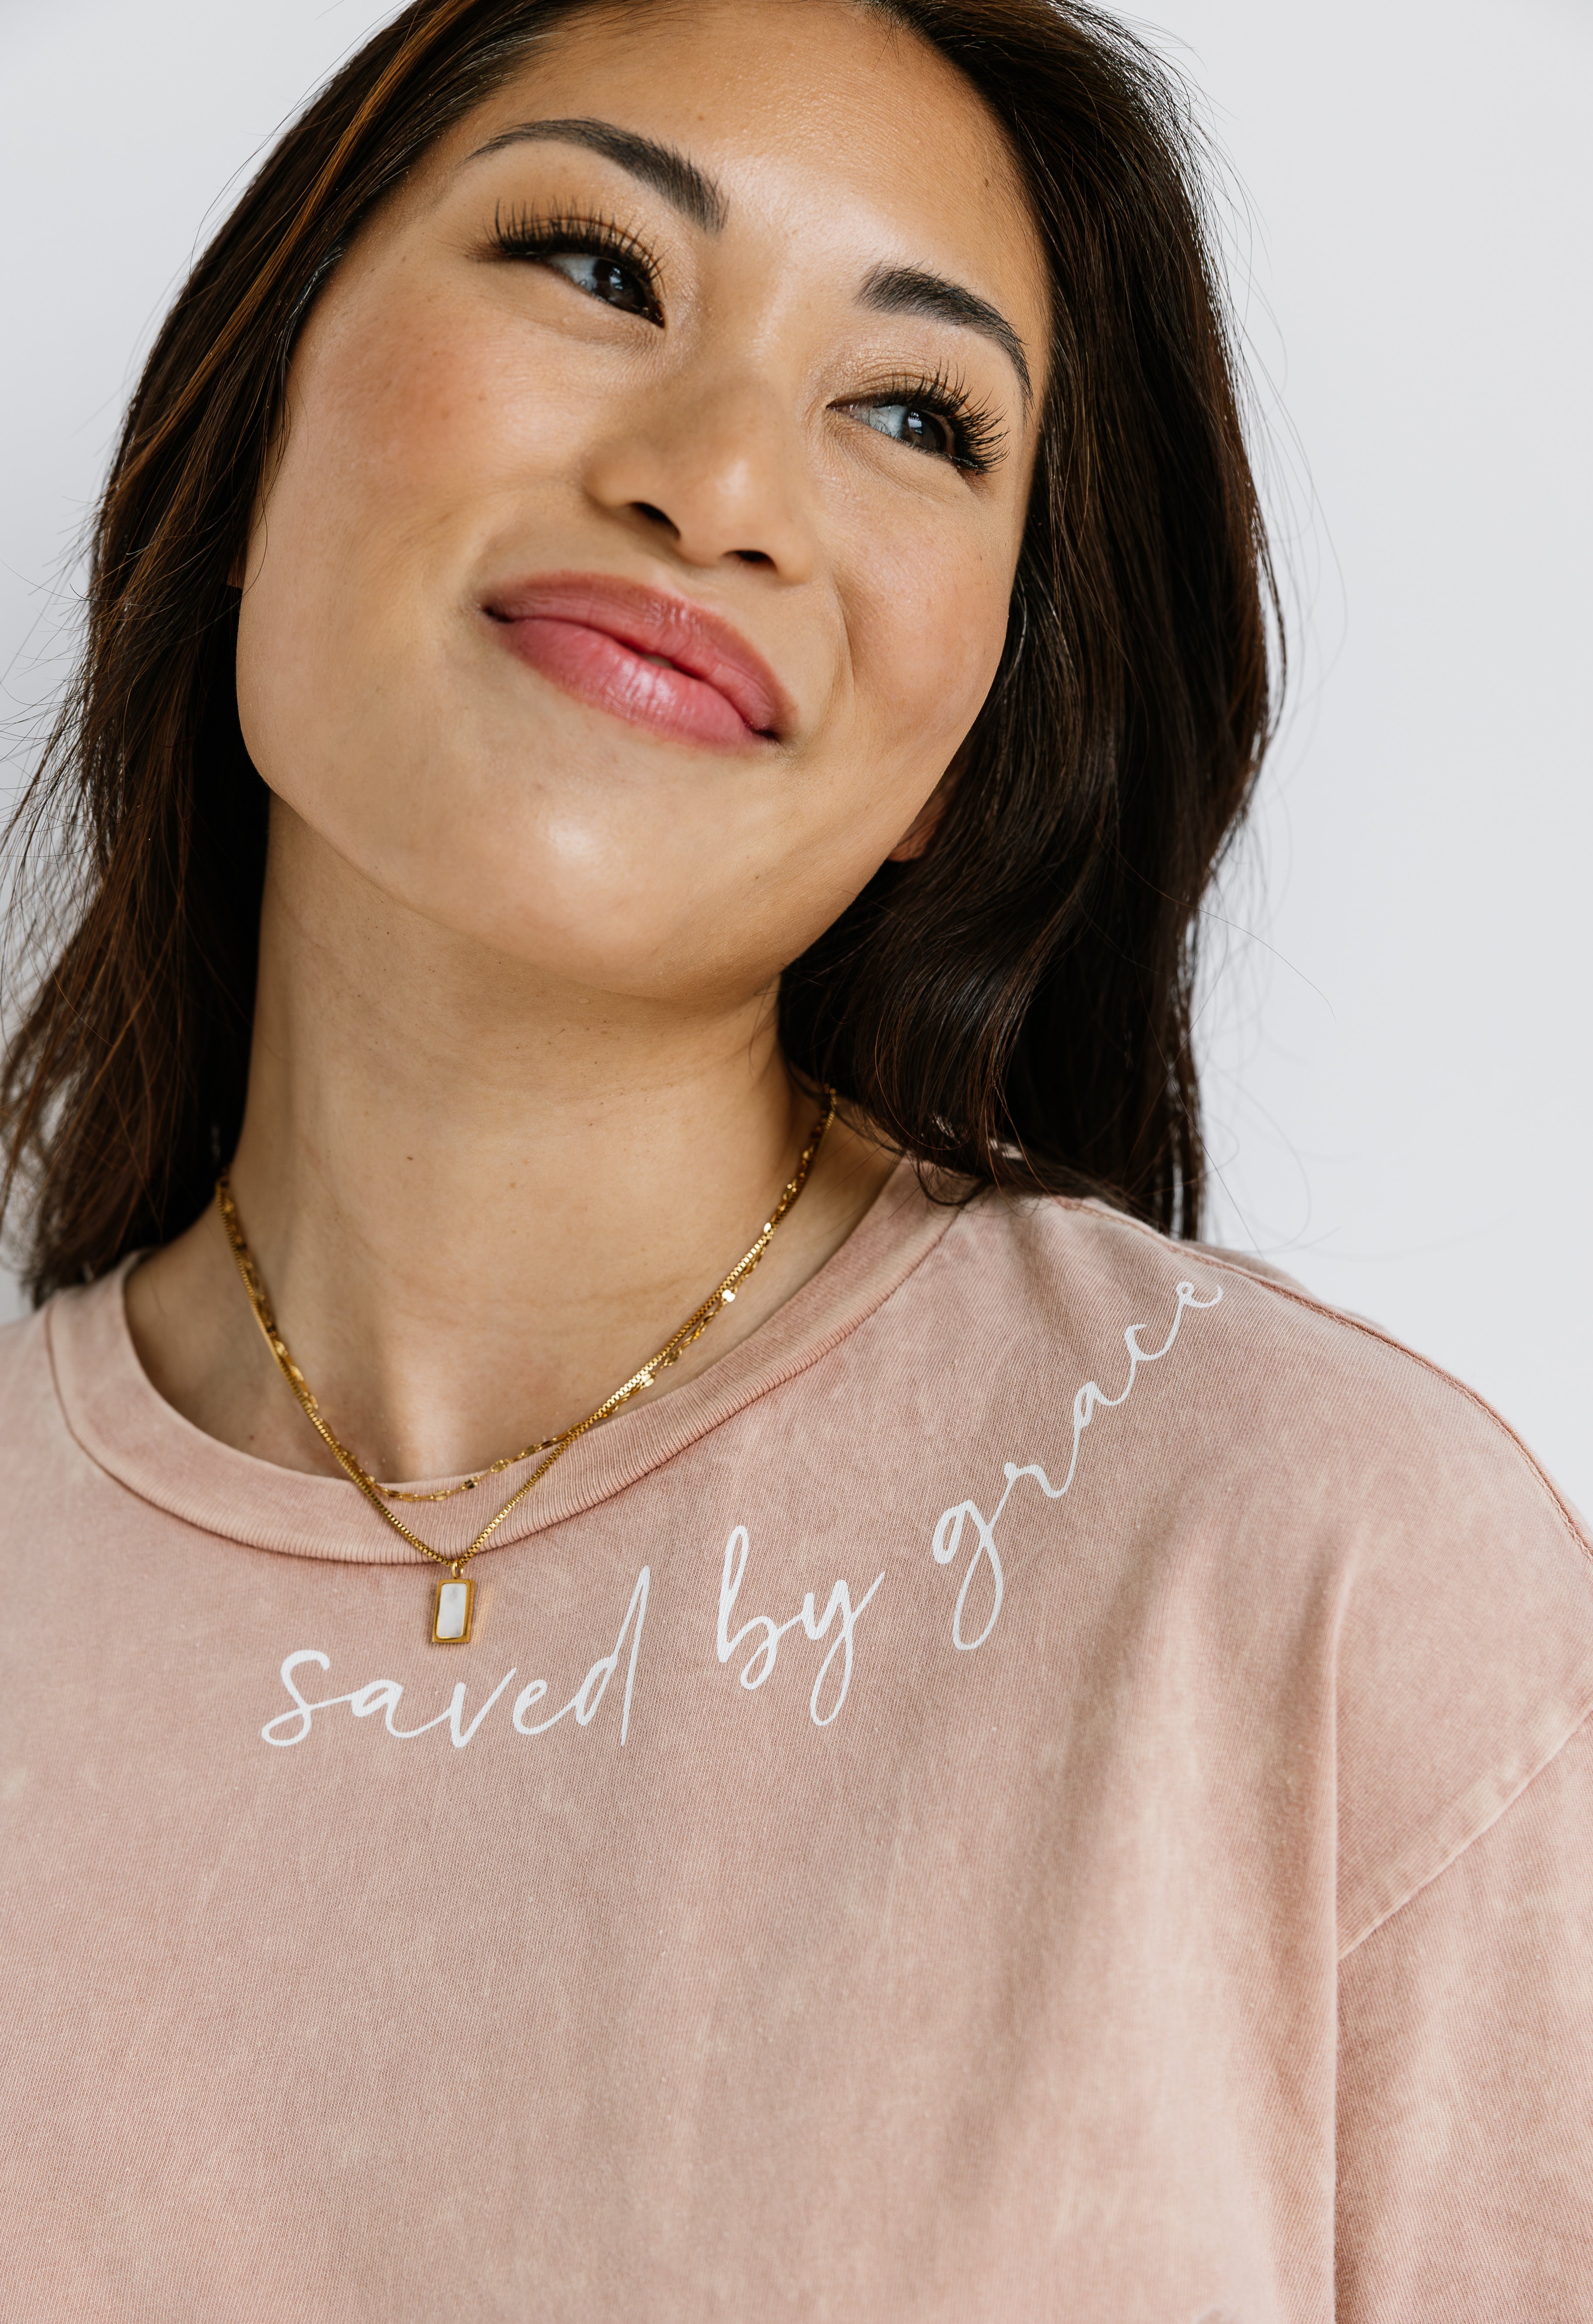 Saved By Grace Tee - SOFT PINK - willows clothing S/S Shirt